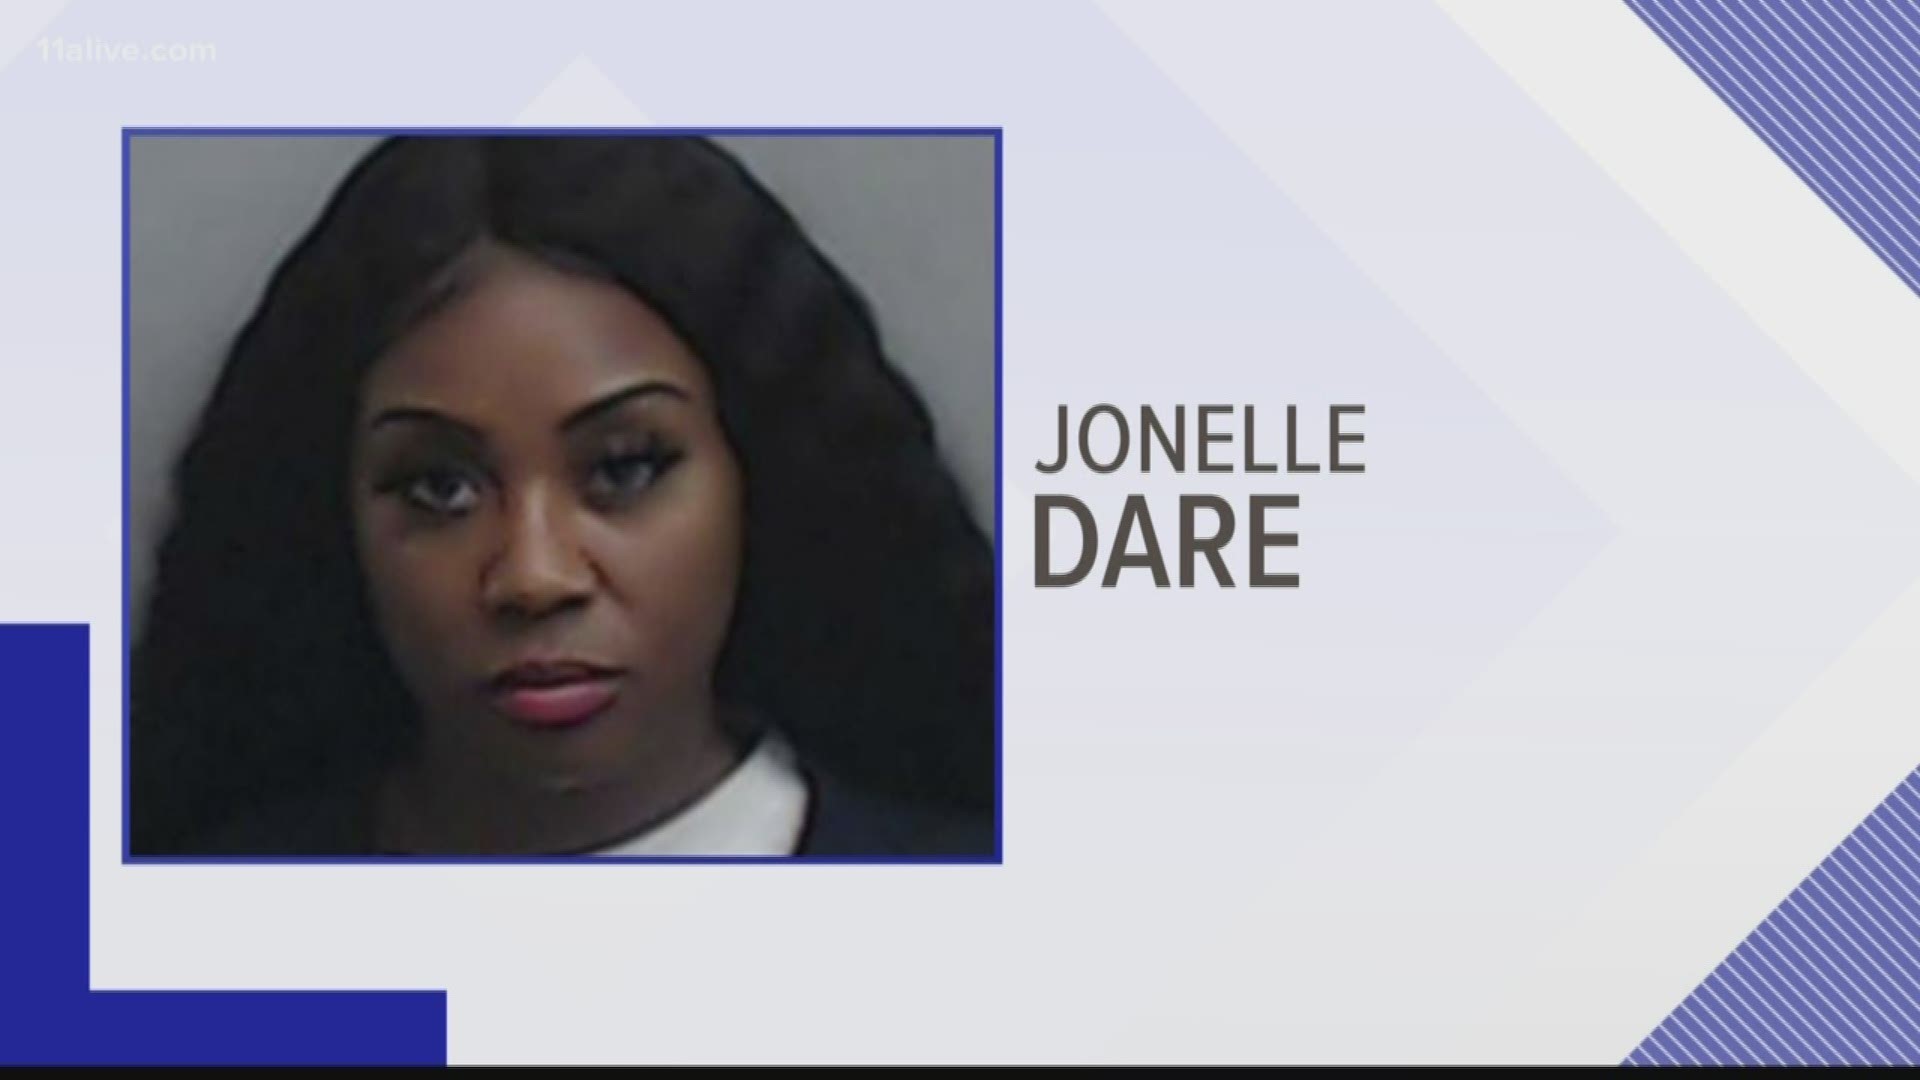 Jonelle Jade Dare is facing extradition back to Kentucky for the shooting. Fortunately, no one was injured.